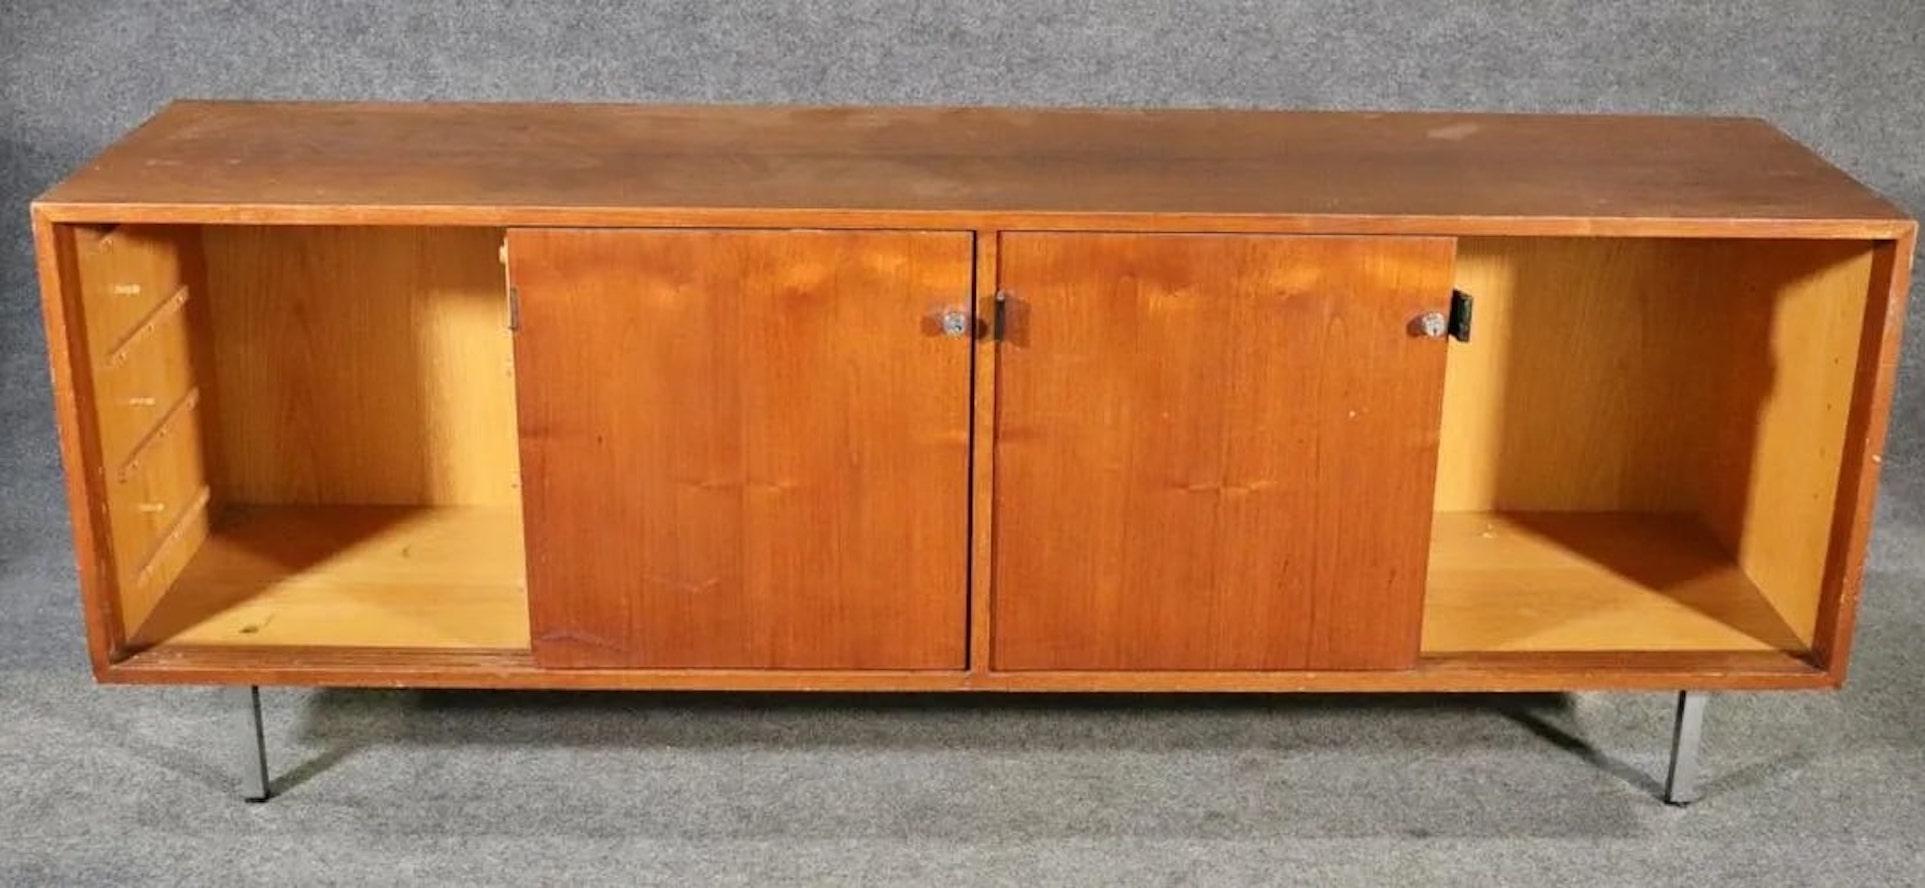 Mid-century modern office sideboard by Florence Knoll. Walnut grain throughout with strong metal legs. Pull out tray and file cabinet.
Please confirm location NY or NJ